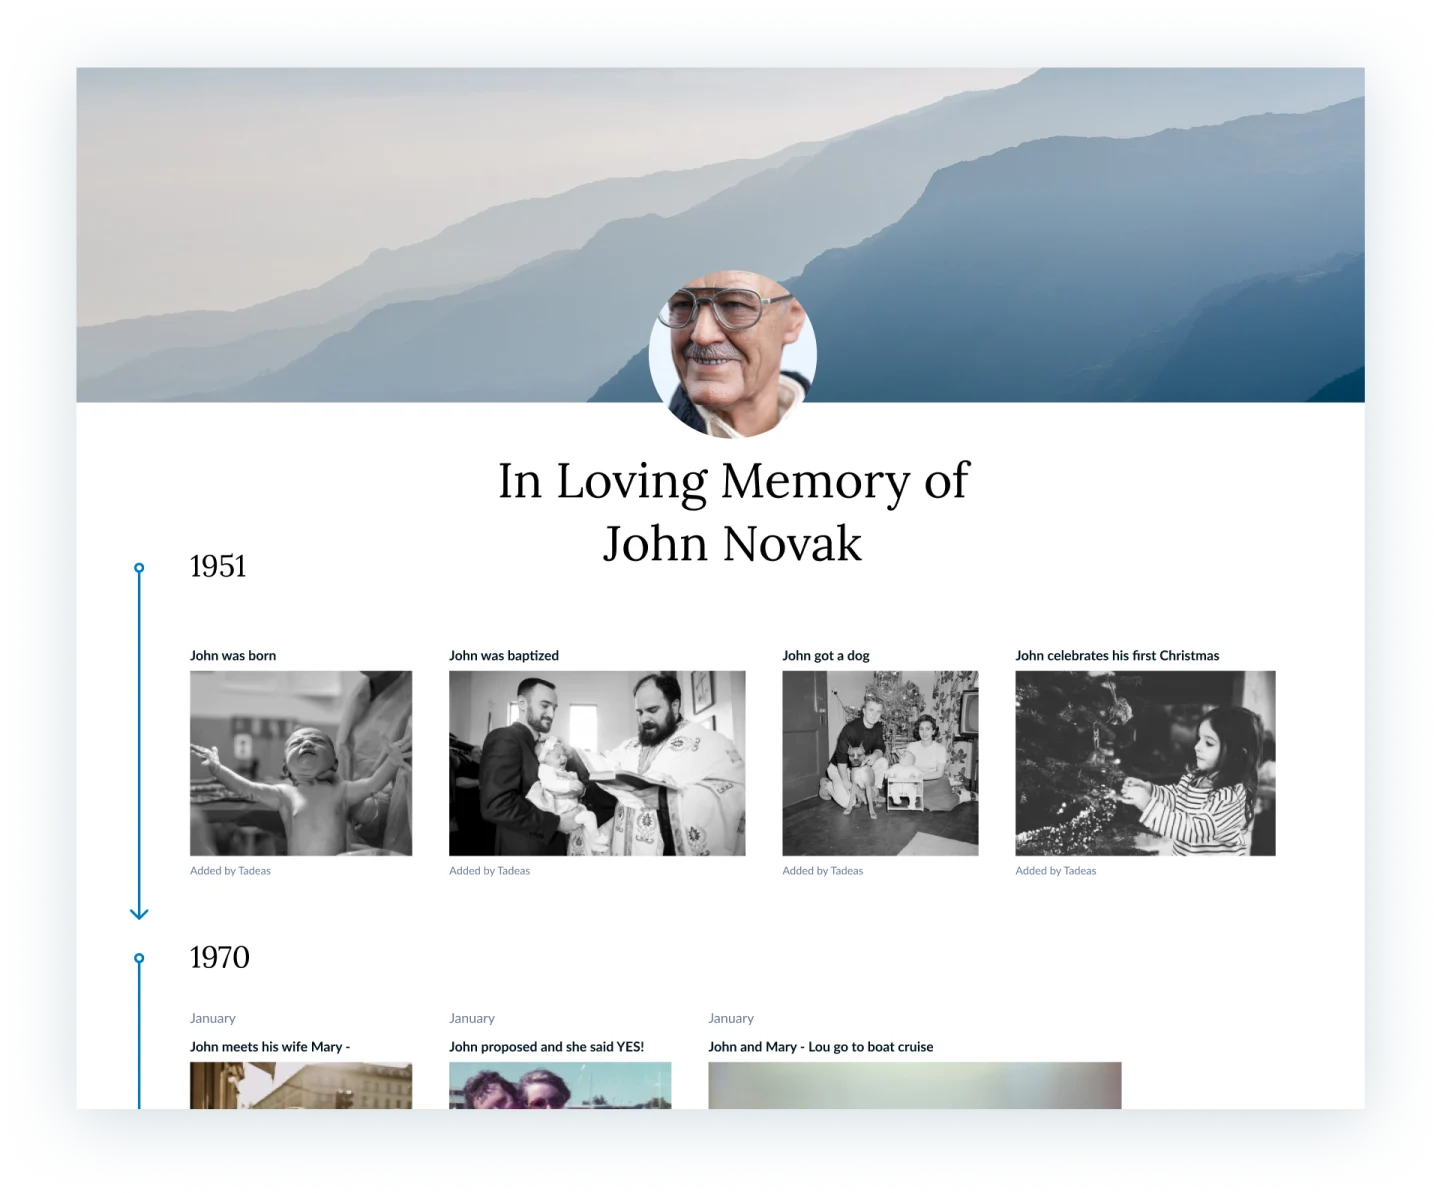 Timeline image for Life Stories landing page